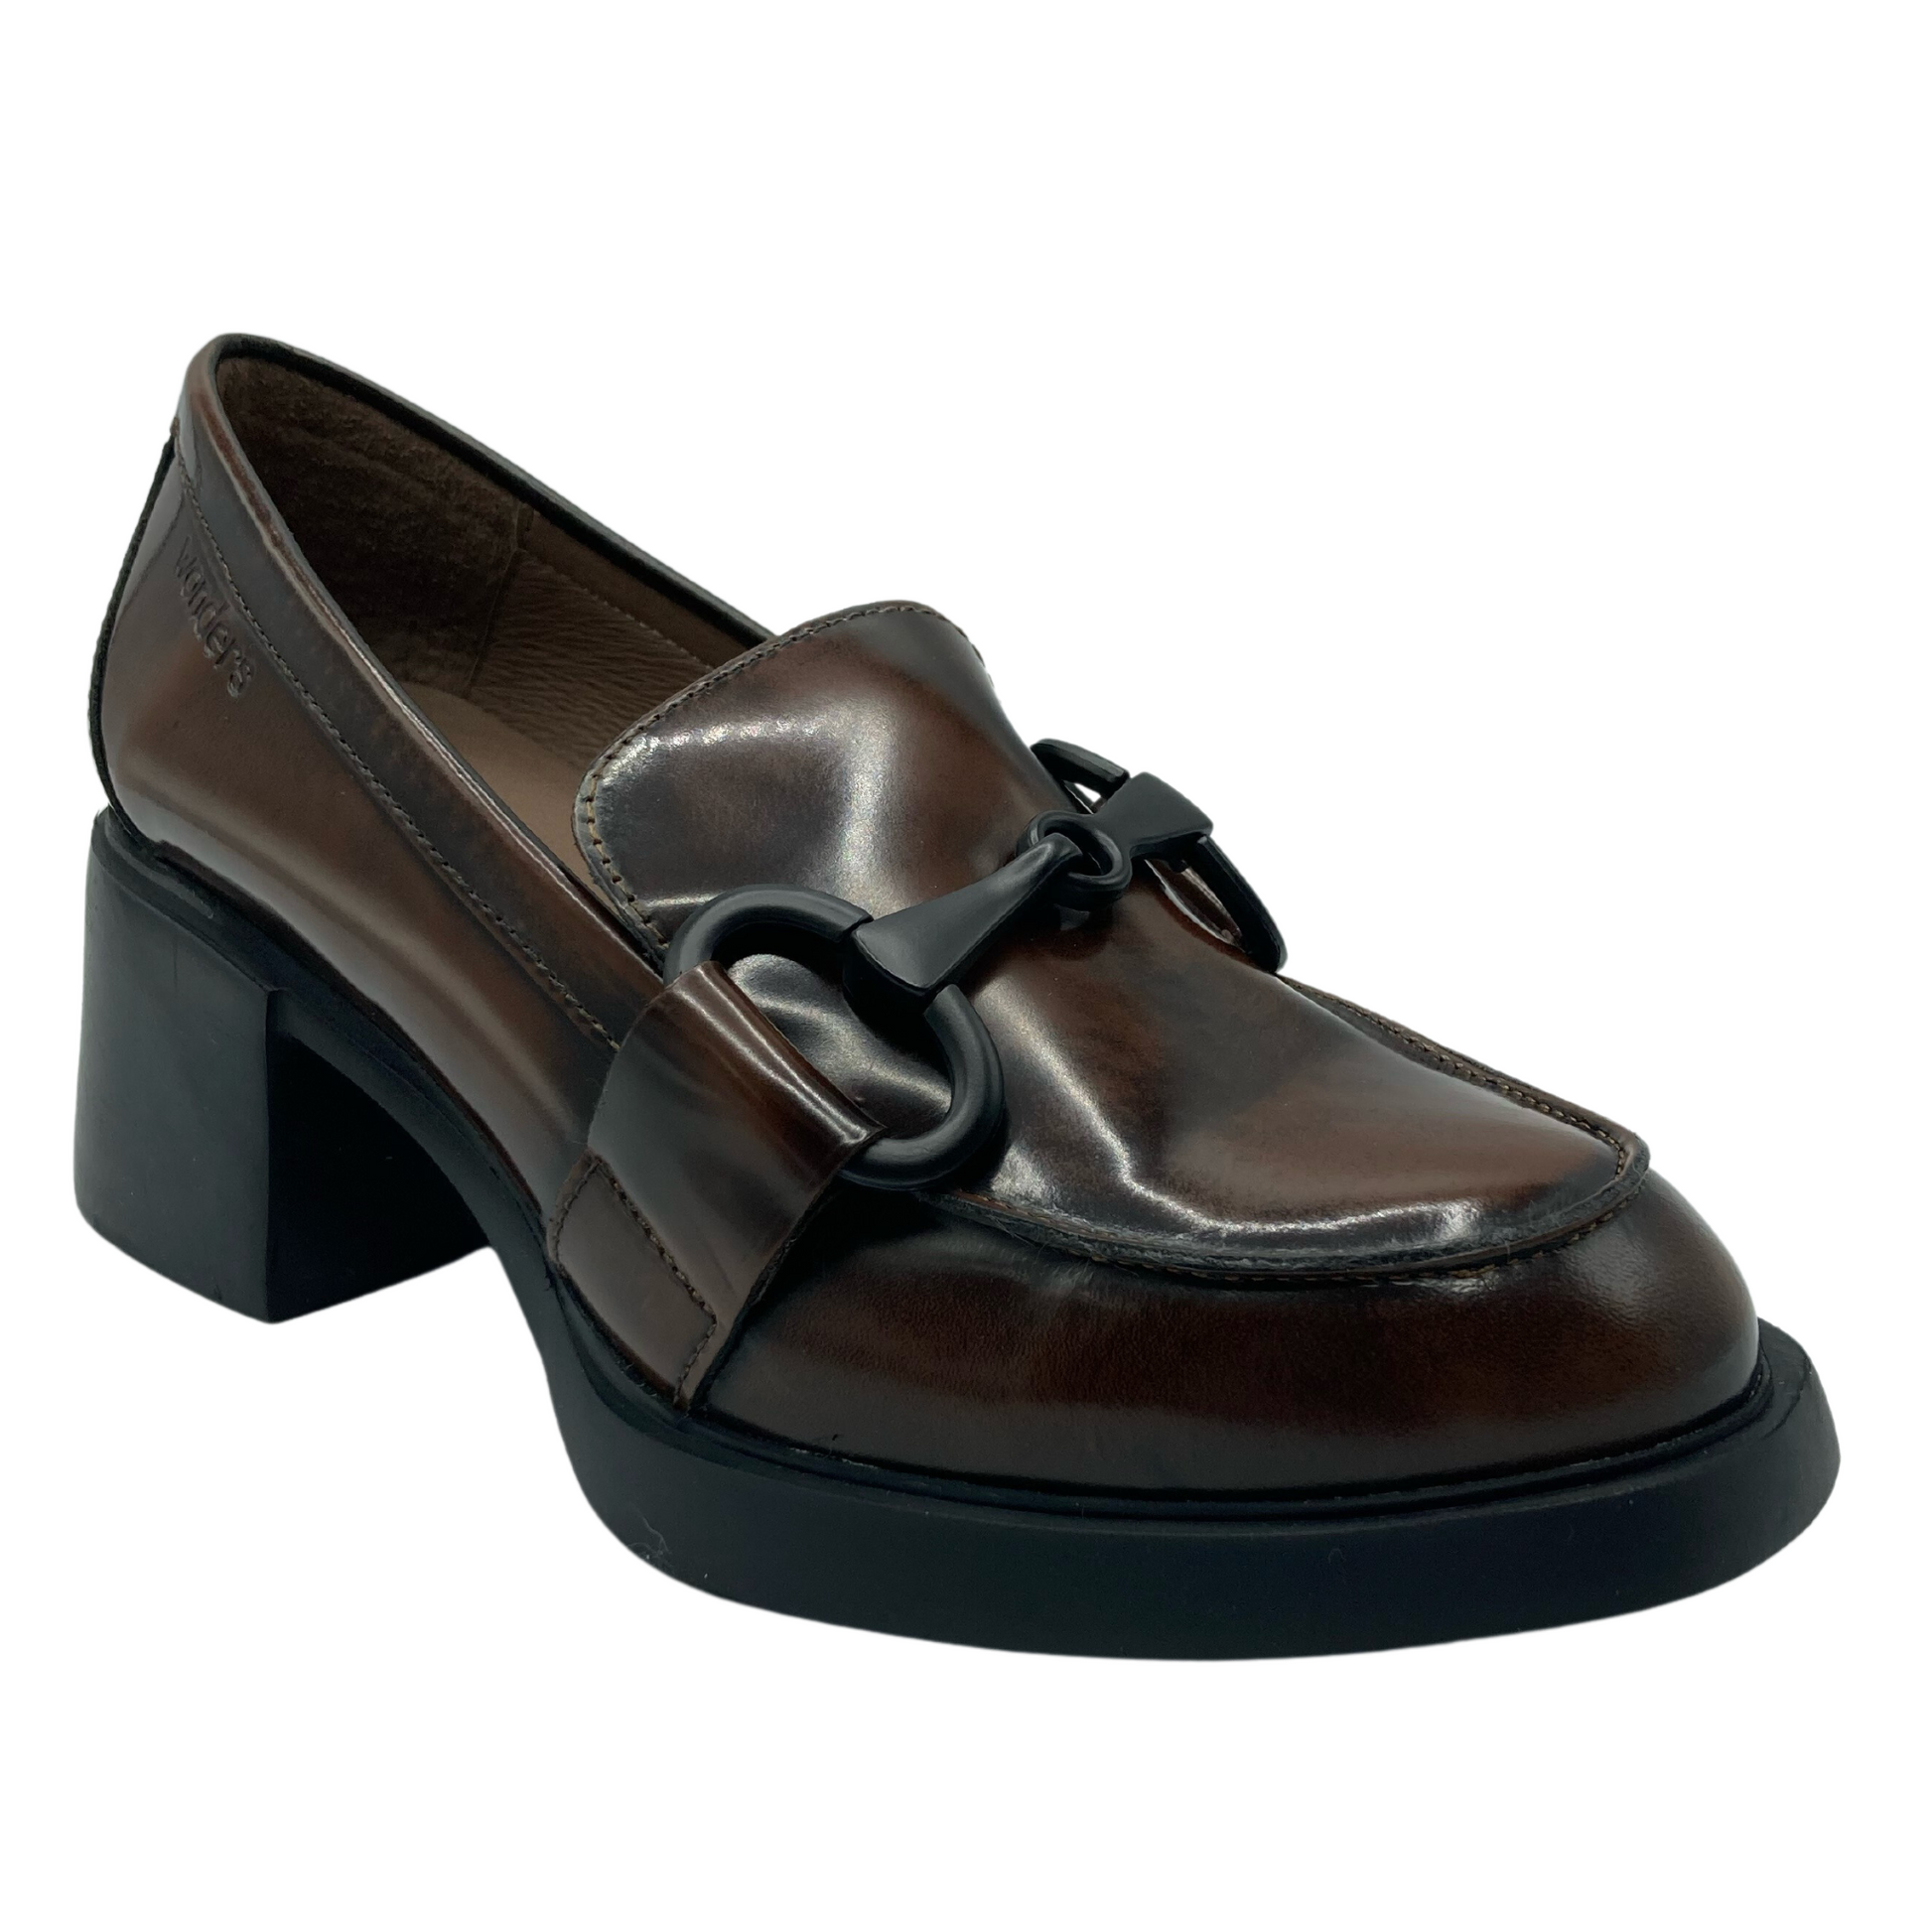 Angled view of brown/burgundy leather loafer with black bit detail